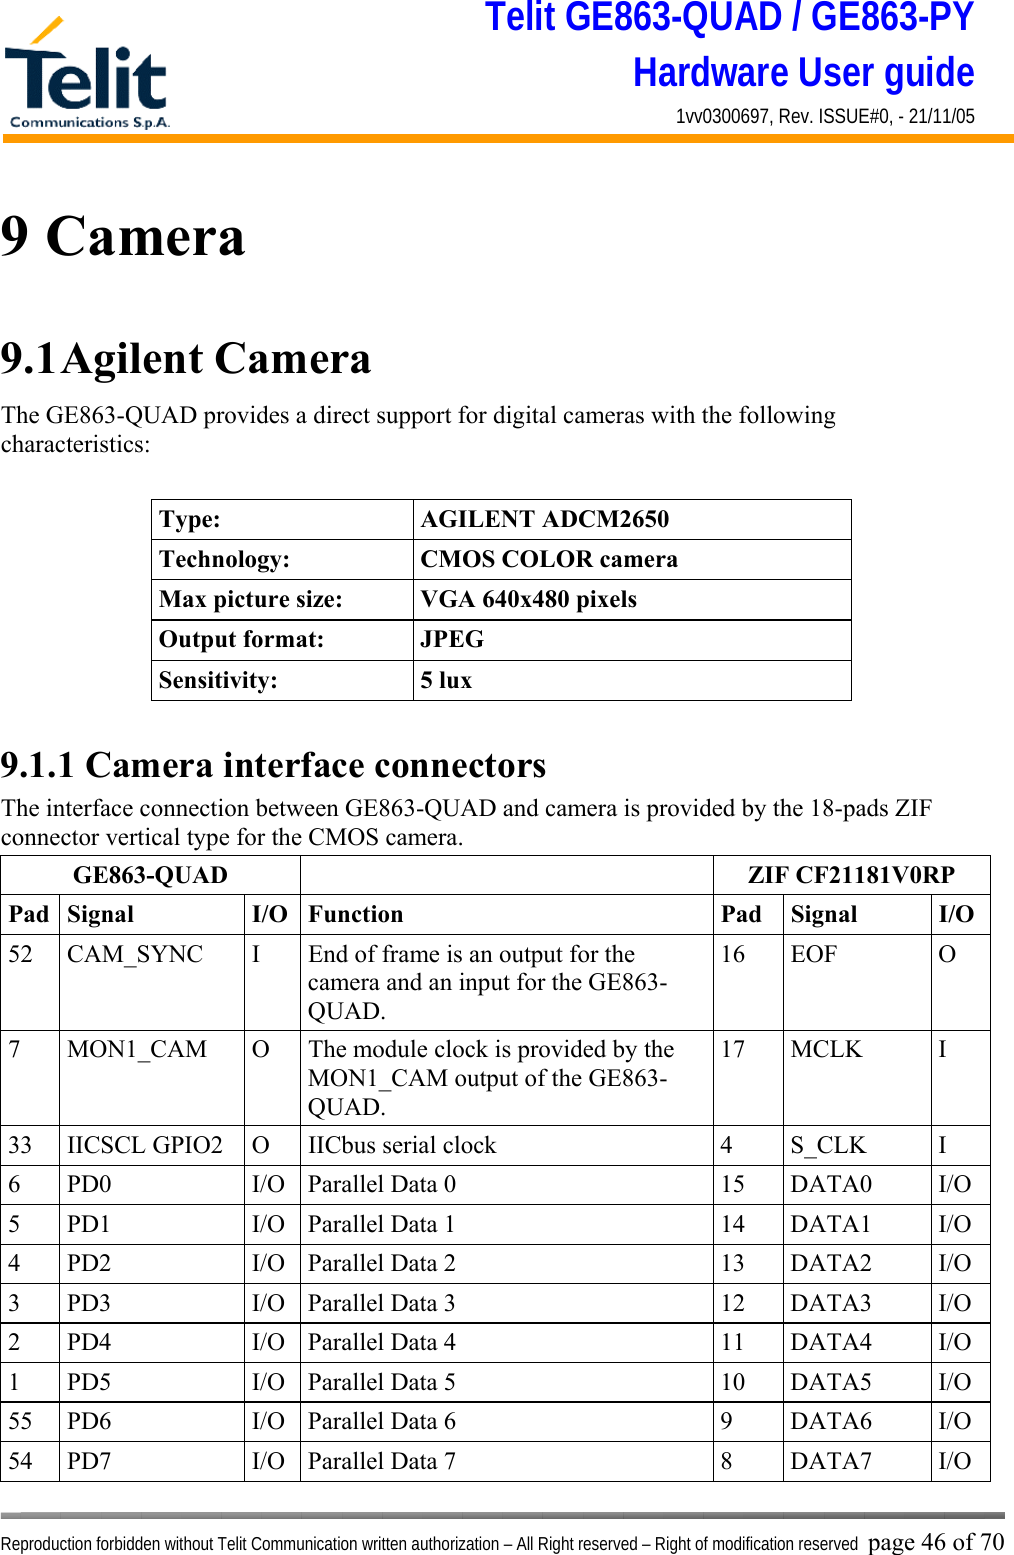 Telit GE863-QUAD / GE863-PY Hardware User guide 1vv0300697, Rev. ISSUE#0, - 21/11/05    Reproduction forbidden without Telit Communication written authorization – All Right reserved – Right of modification reserved page 46 of 70 9 Camera 9.1 Agilent  Camera The GE863-QUAD provides a direct support for digital cameras with the following characteristics:  Type: AGILENT ADCM2650 Technology:  CMOS COLOR camera Max picture size:  VGA 640x480 pixels Output format:  JPEG Sensitivity: 5 lux  9.1.1 Camera interface connectors The interface connection between GE863-QUAD and camera is provided by the 18-pads ZIF connector vertical type for the CMOS camera. GE863-QUAD  ZIF CF21181V0RP Pad Signal  I/O Function  Pad  Signal  I/O 52  CAM_SYNC  I  End of frame is an output for the camera and an input for the GE863-QUAD. 16 EOF  O 7  MON1_CAM  O  The module clock is provided by the MON1_CAM output of the GE863-QUAD. 17 MCLK  I 33  IICSCL GPIO2  O  IICbus serial clock   4  S_CLK  I 6  PD0  I/O  Parallel Data 0  15  DATA0  I/O 5  PD1  I/O  Parallel Data 1  14  DATA1  I/O 4  PD2  I/O  Parallel Data 2  13  DATA2  I/O 3  PD3  I/O  Parallel Data 3  12  DATA3  I/O 2  PD4  I/O  Parallel Data 4  11  DATA4  I/O 1  PD5  I/O  Parallel Data 5  10  DATA5  I/O 55  PD6  I/O  Parallel Data 6  9  DATA6  I/O 54  PD7  I/O  Parallel Data 7  8  DATA7  I/O 